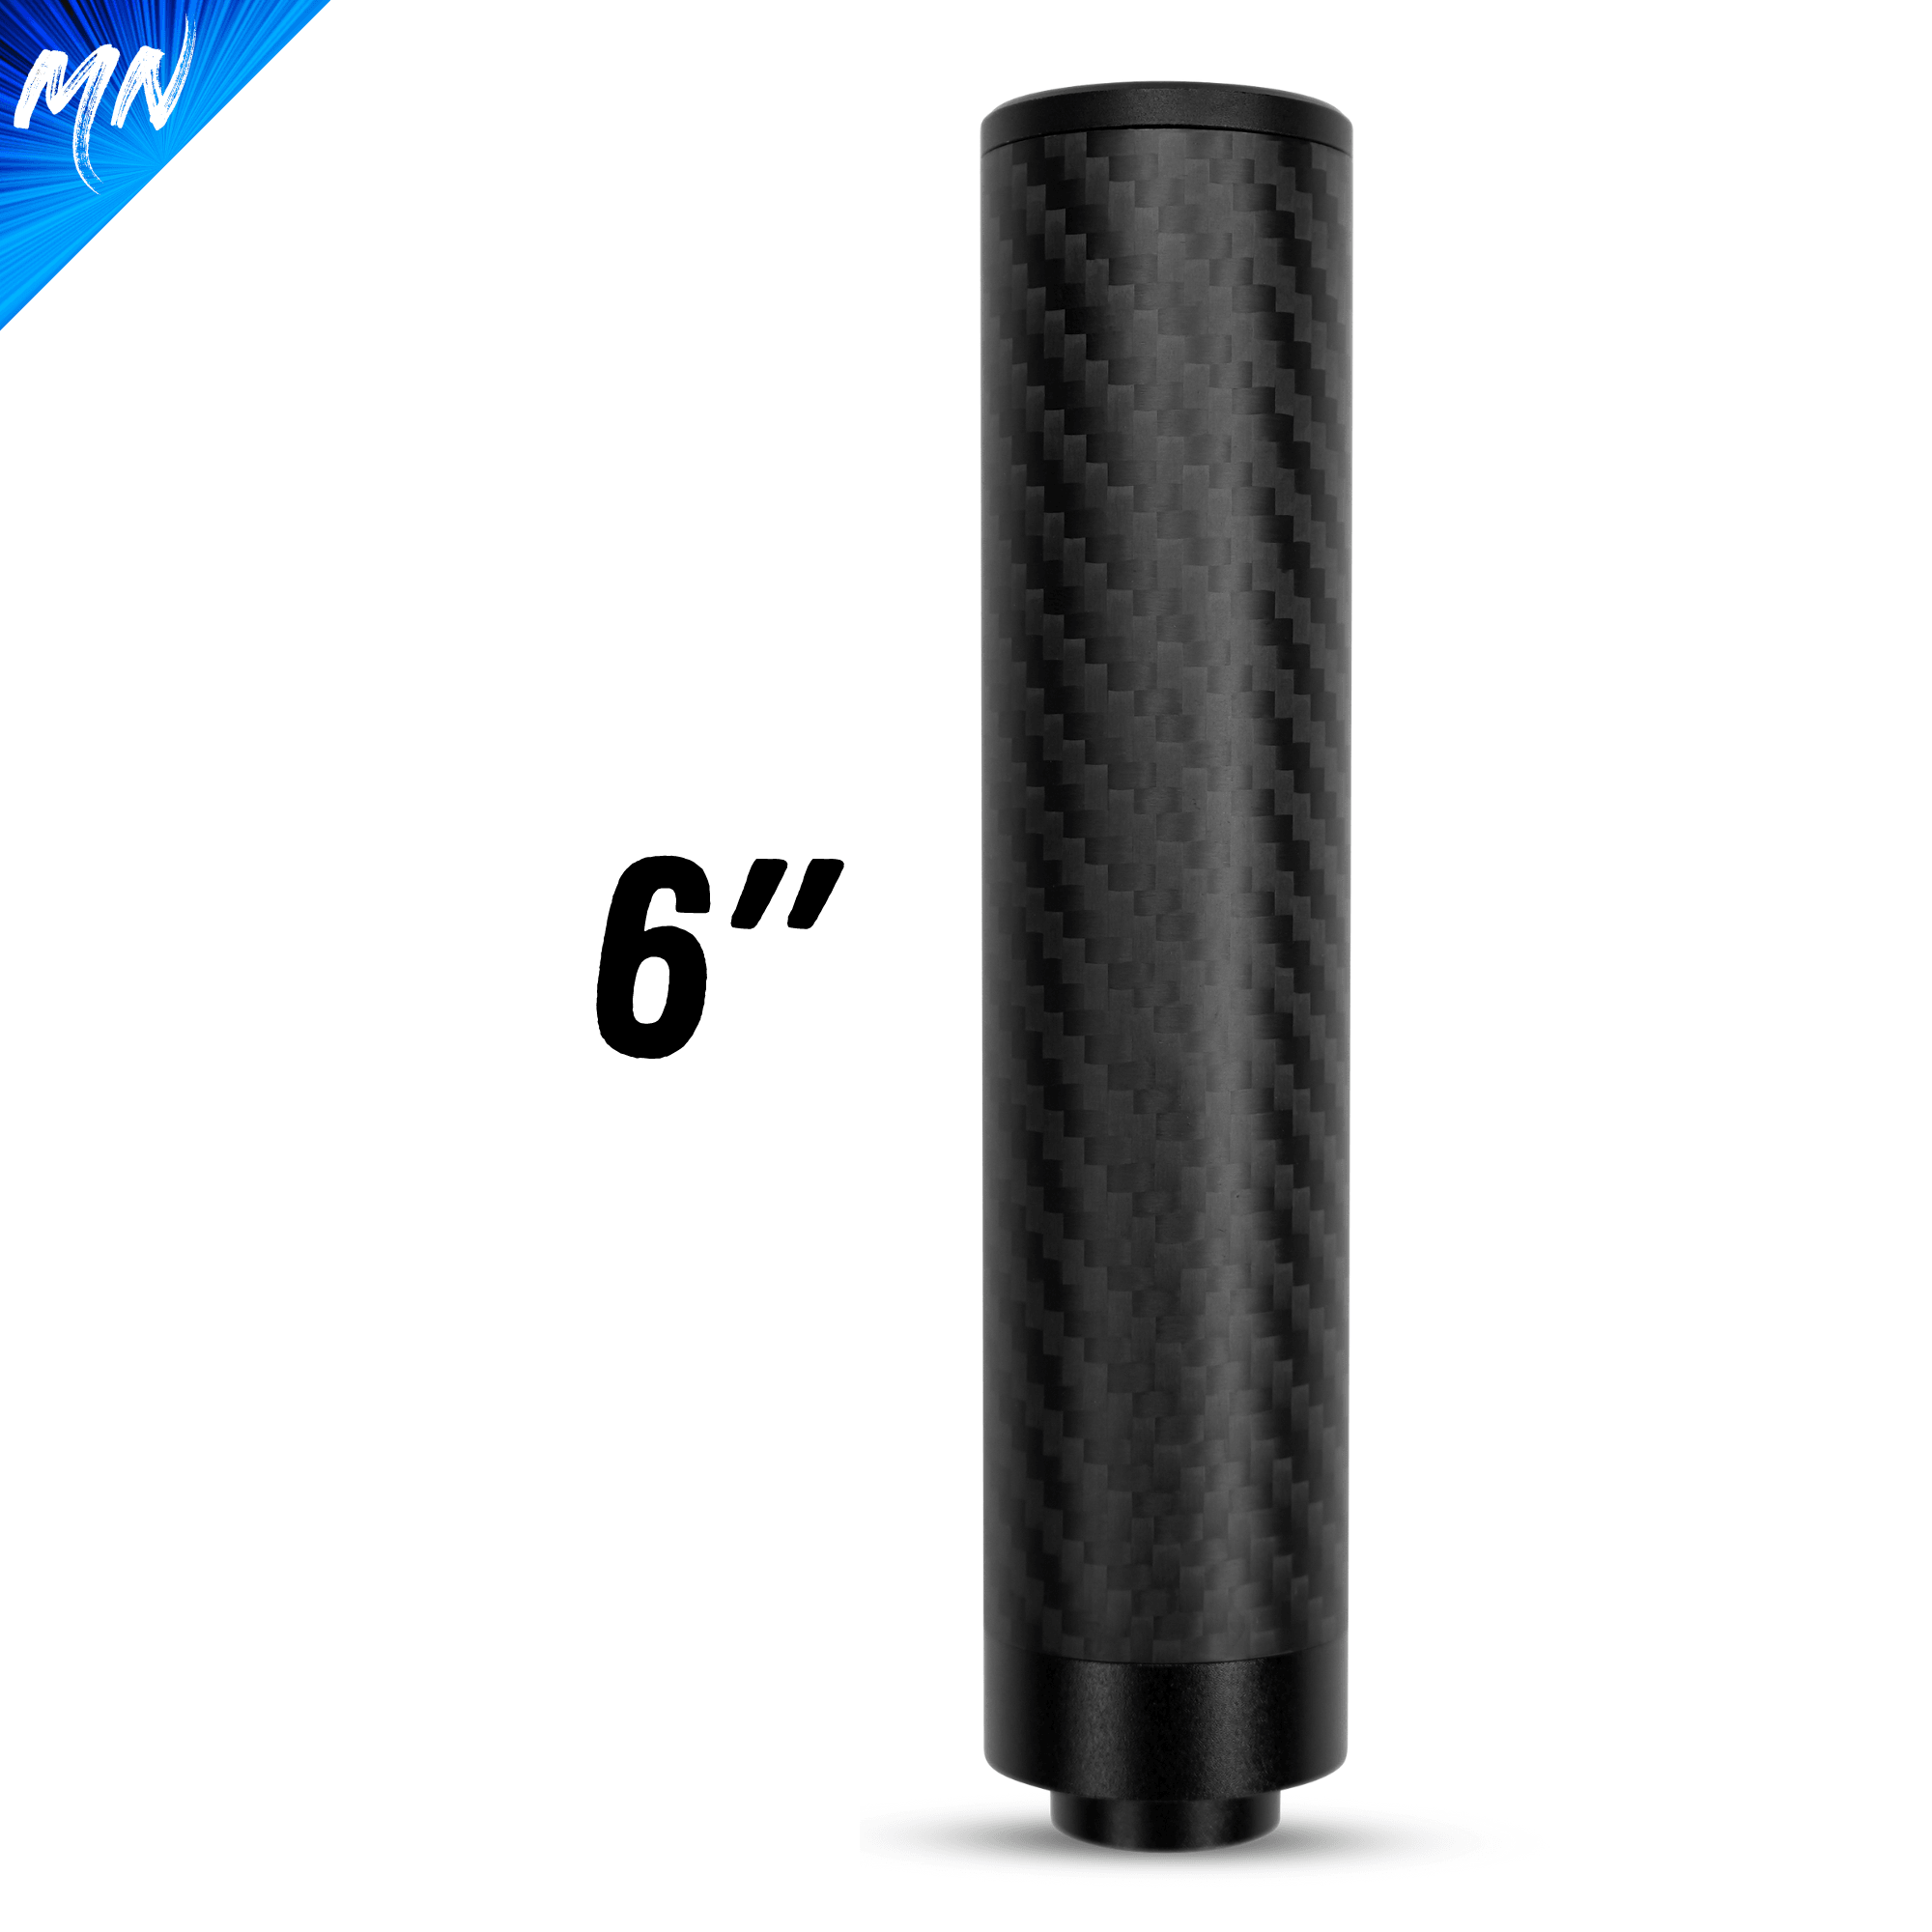 Dominate your airsoft competition with the Minnesota Airsoft Gen 3 Phantom Carbon Fiber Airsoft Suppressor on your gun.